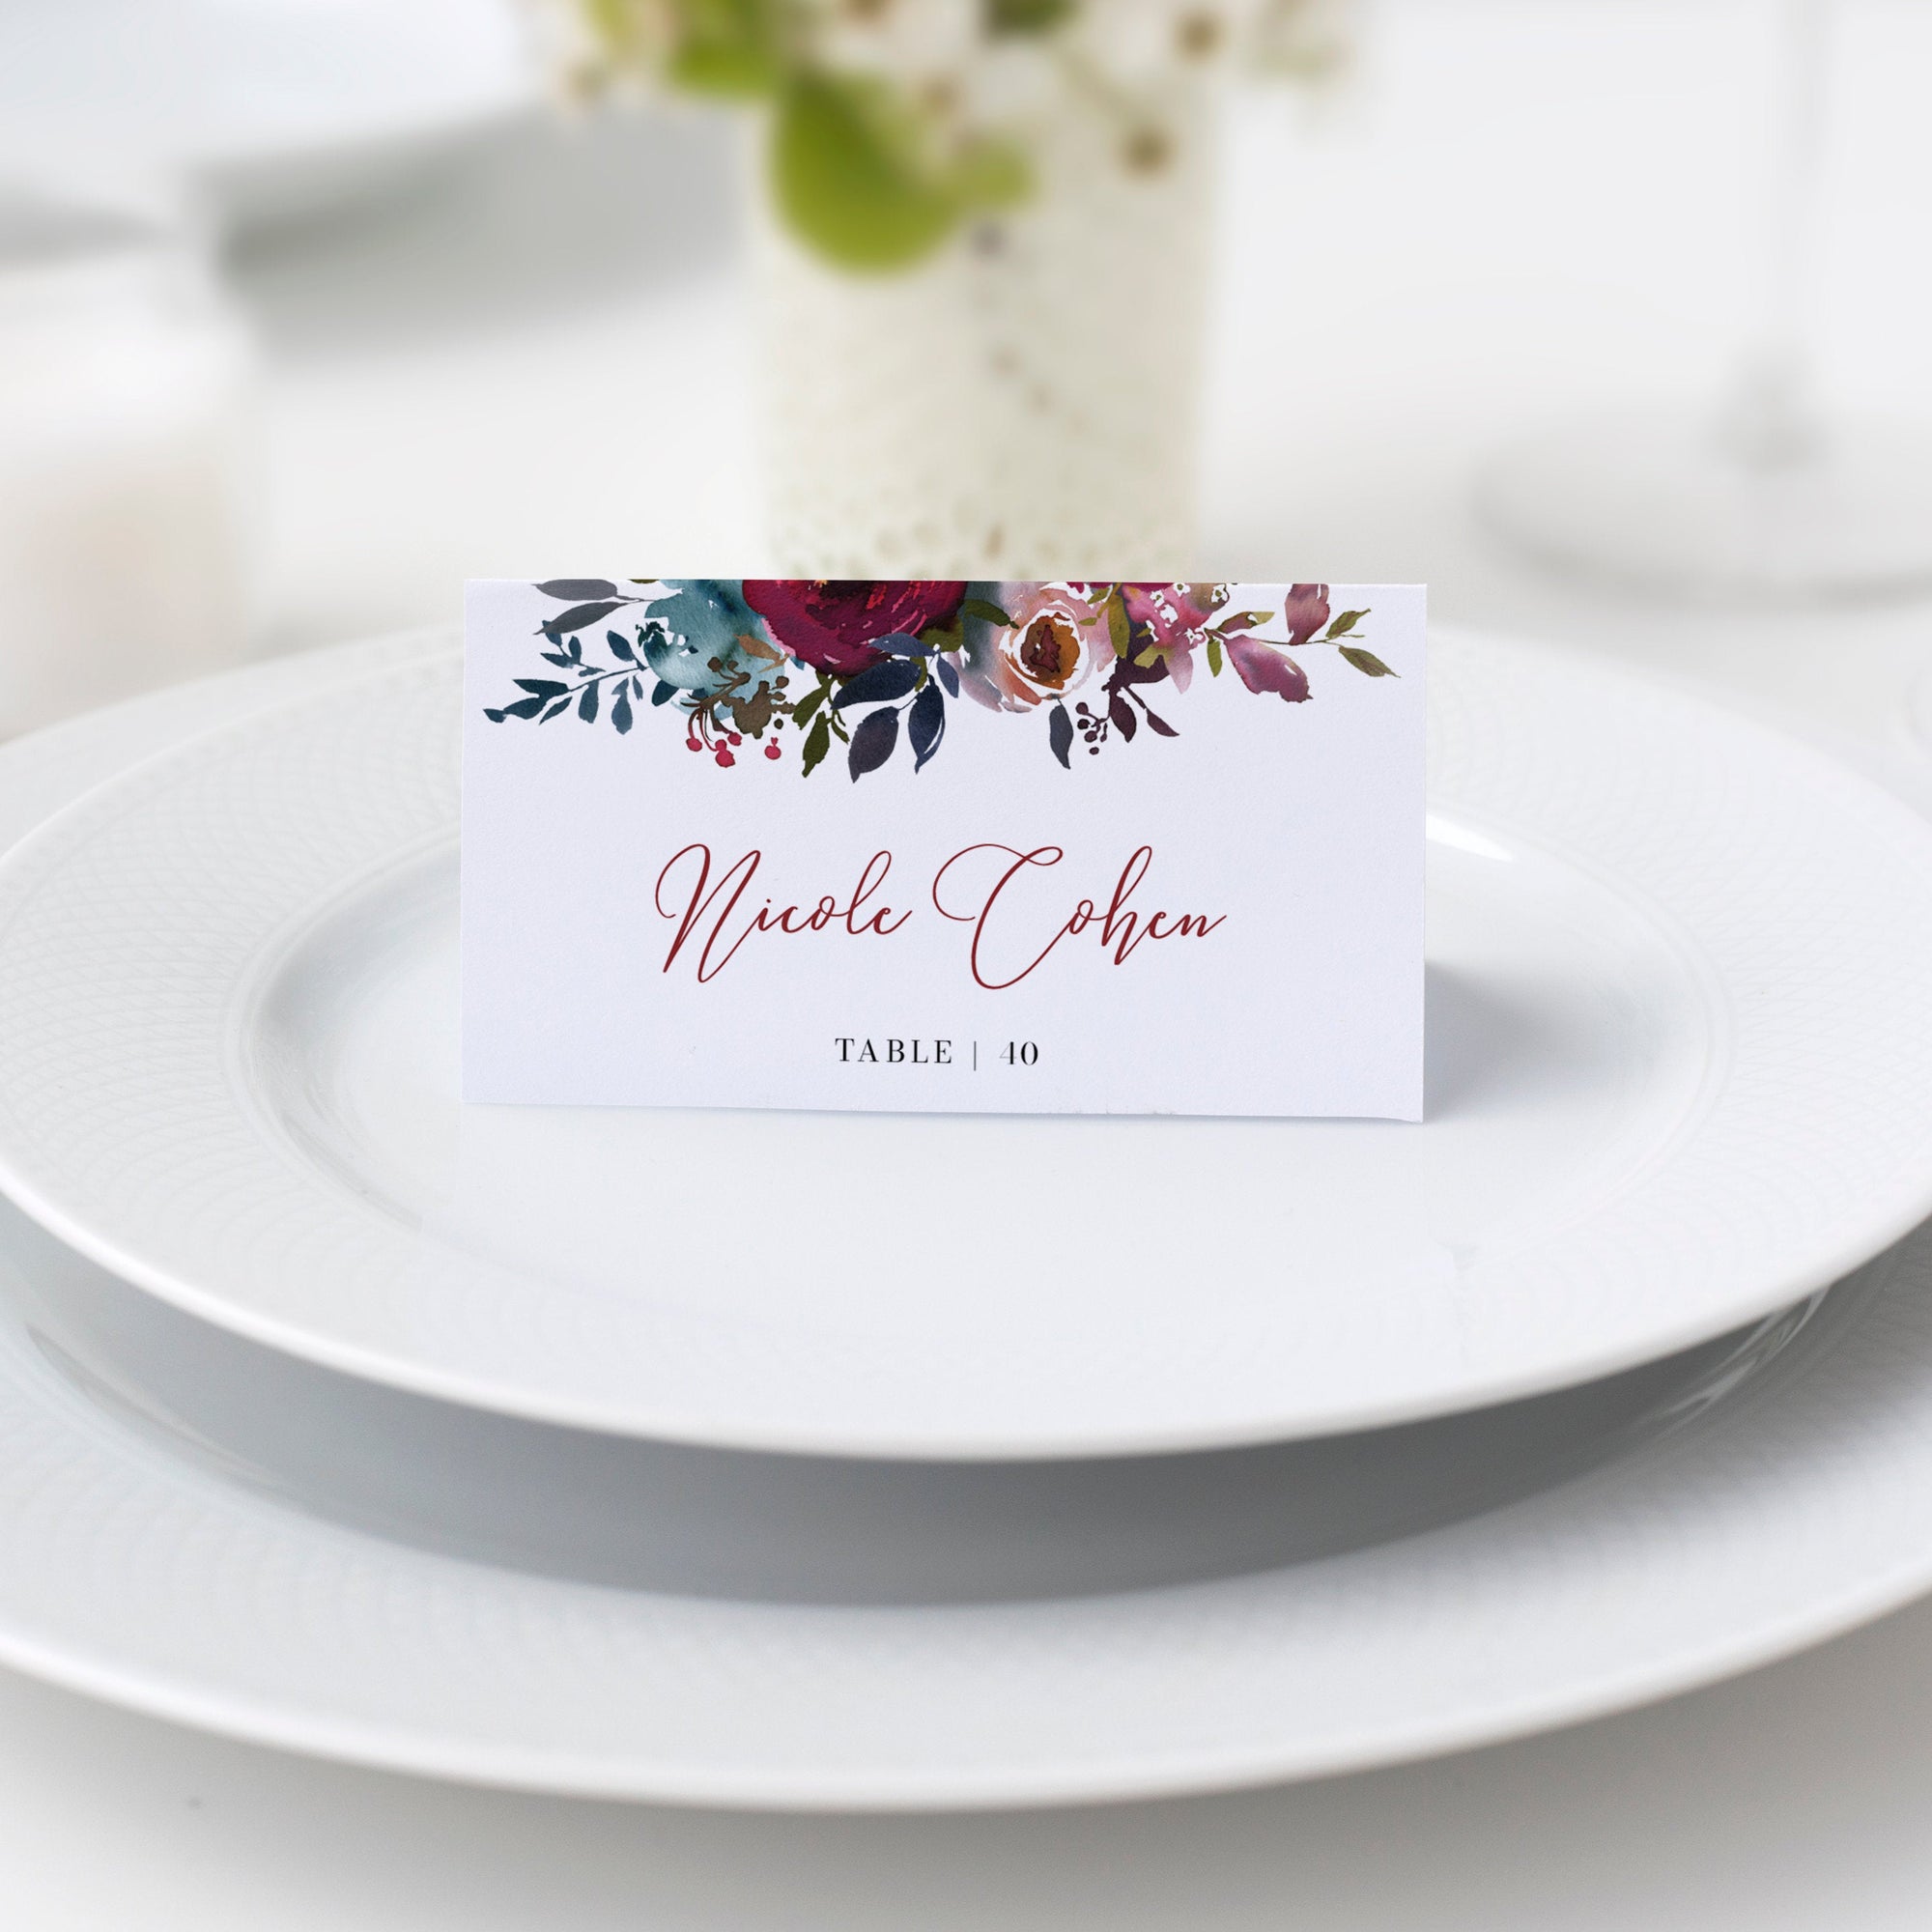 Burgundy and Navy Wedding Place Card Template, Personalized Wedding Name Cards, Printable Place Cards, DIGITAL DOWNLOAD - BB100 - @PlumPolkaDot 